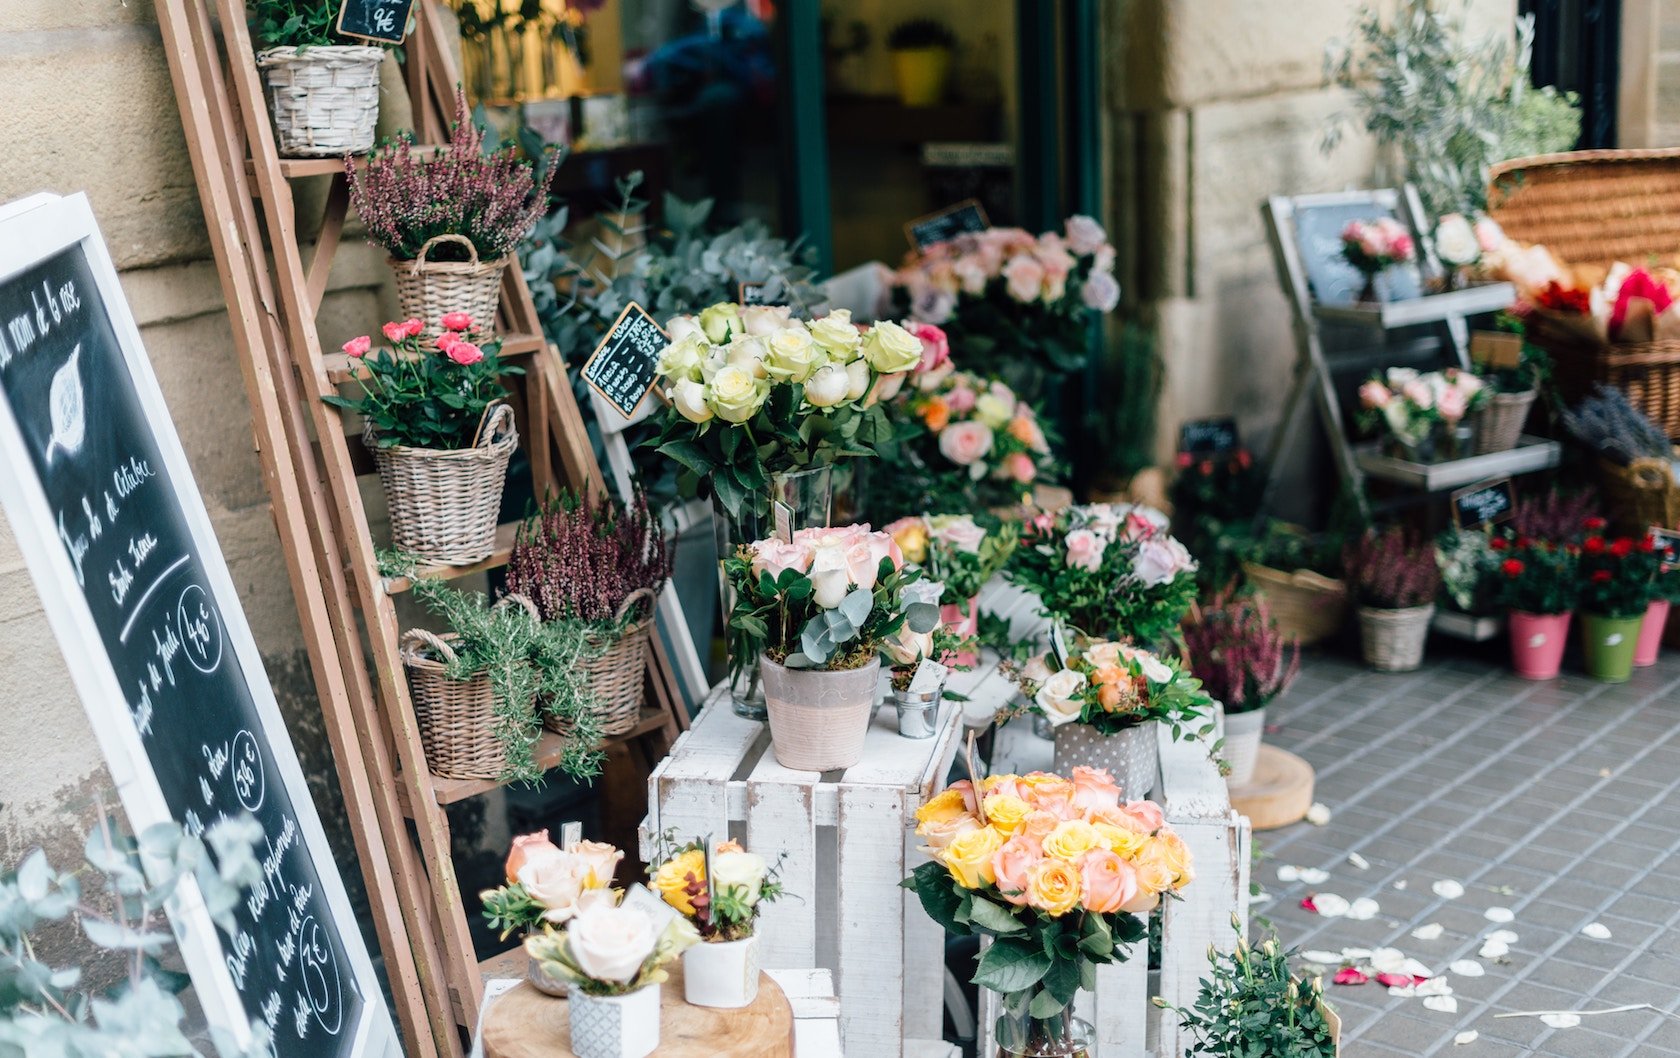 London’s Spring Flowers by London Perfect